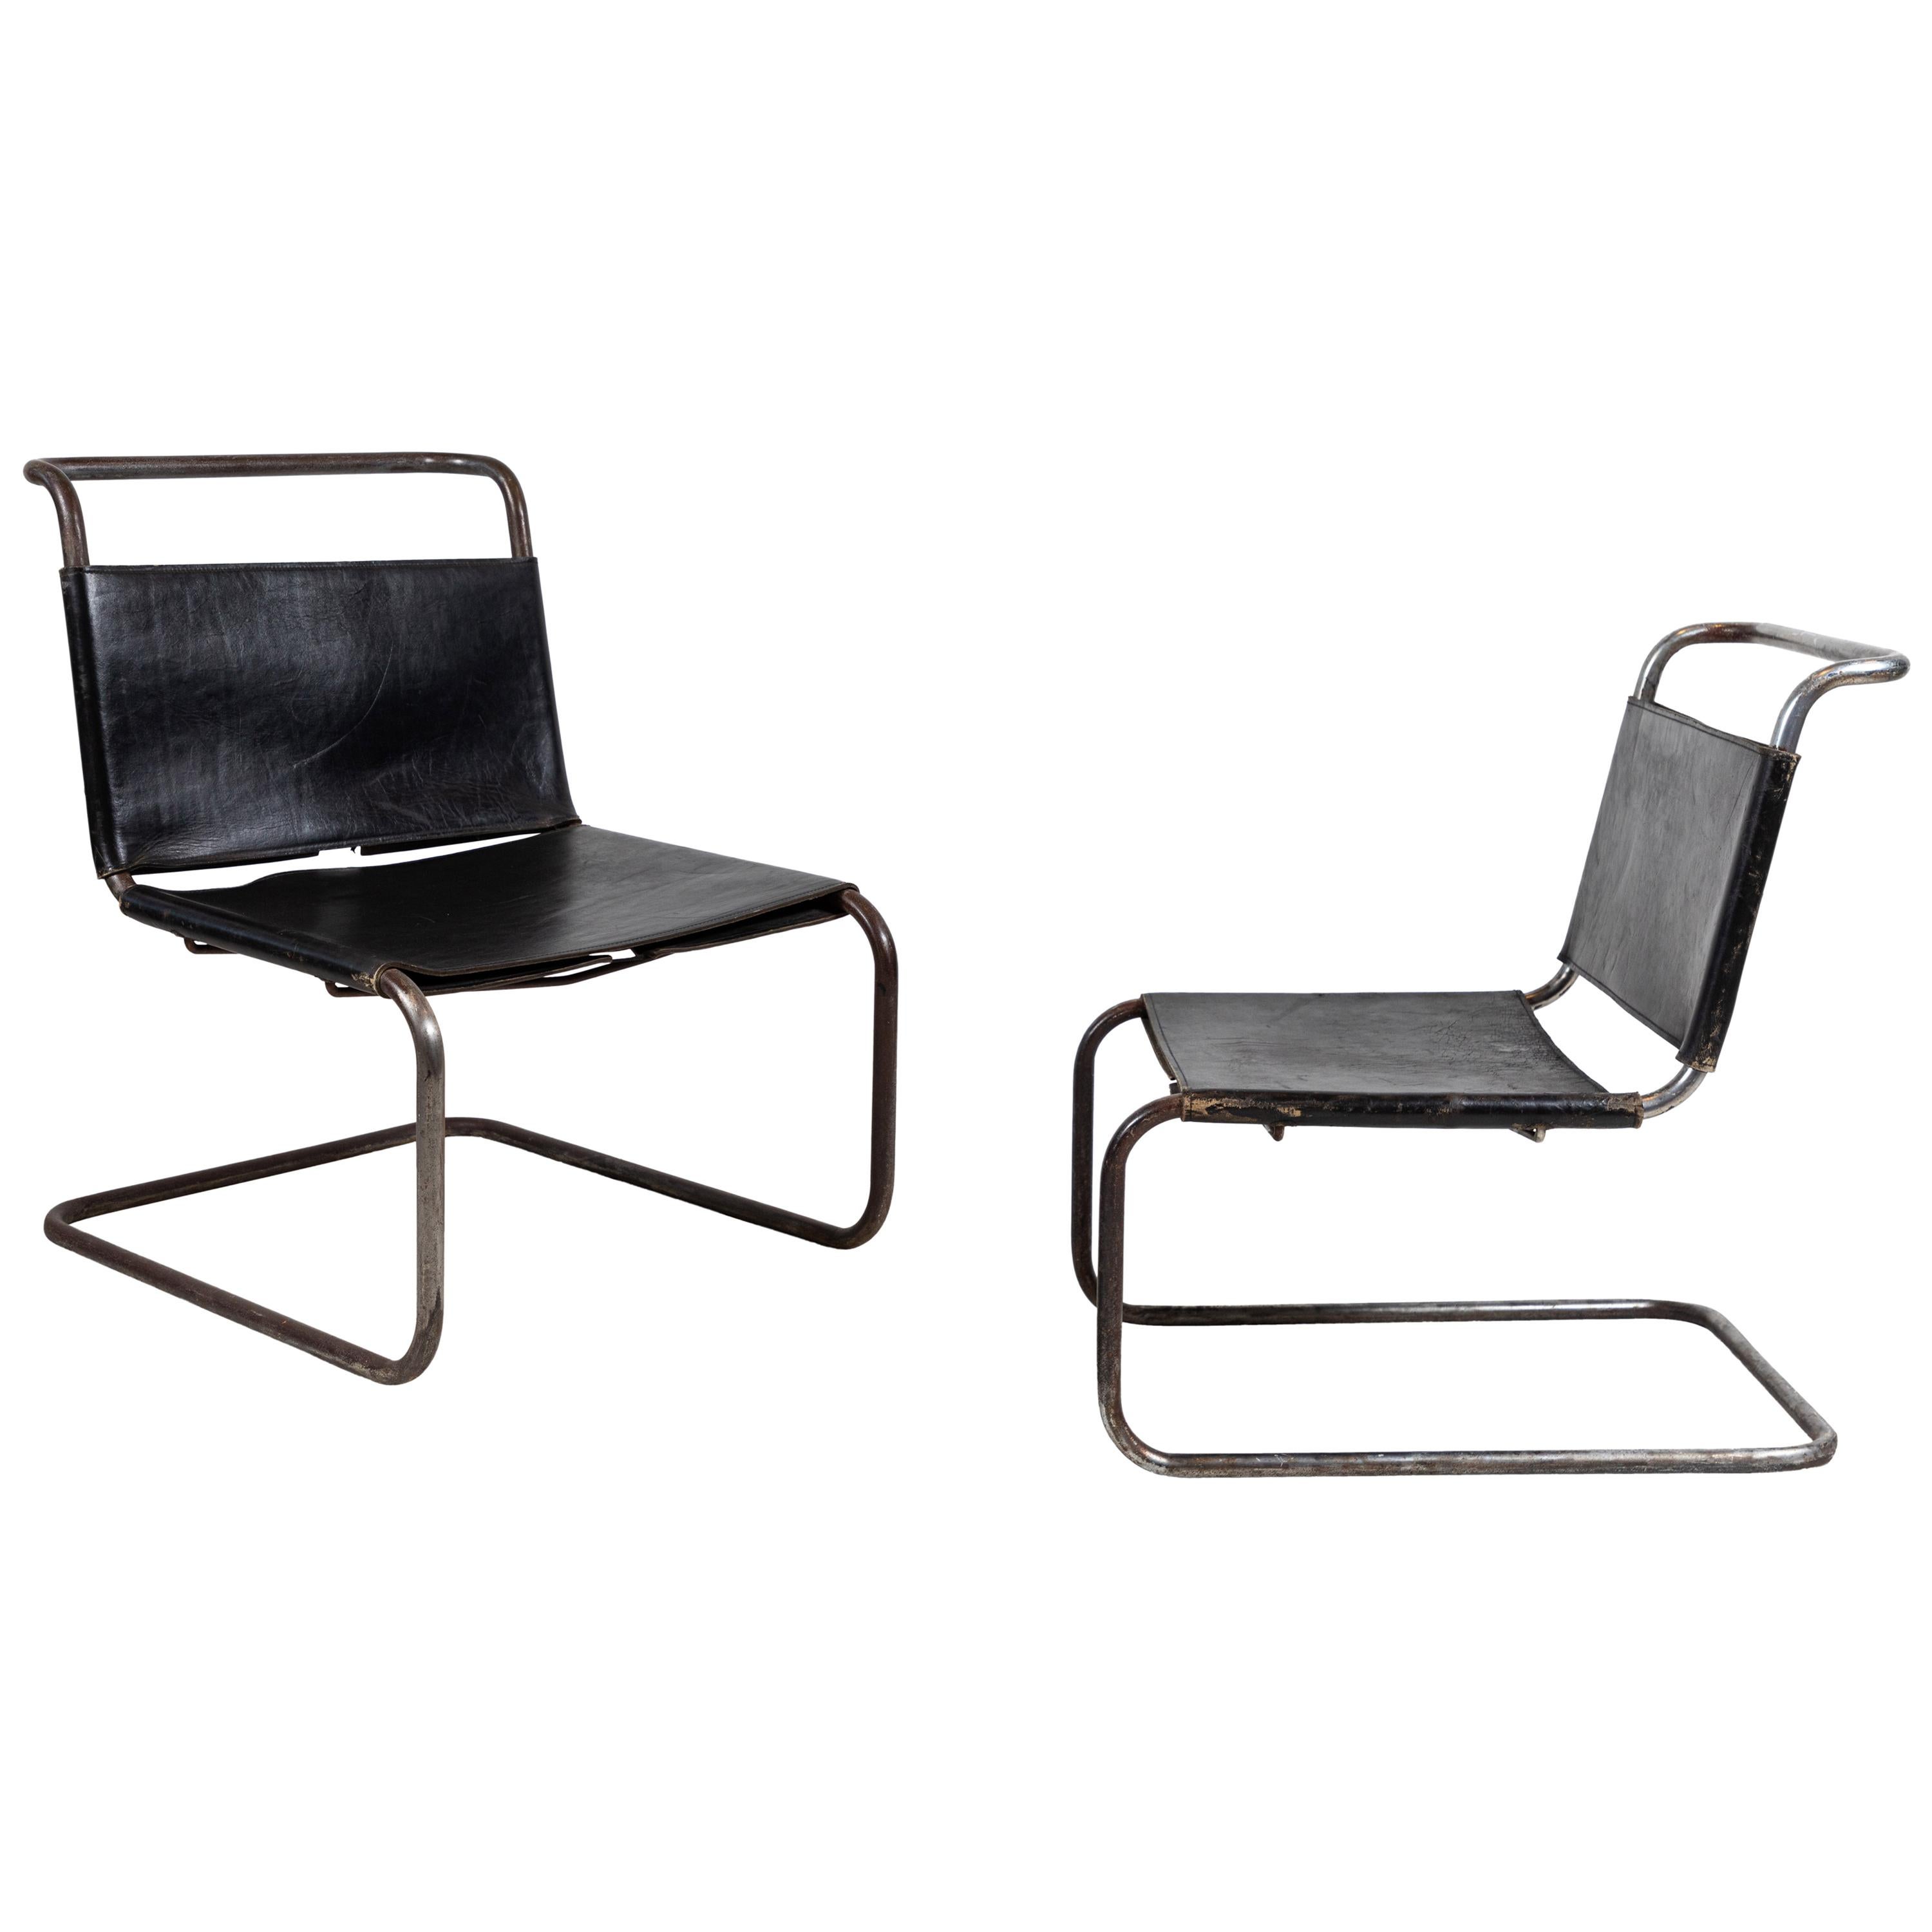 Pair of Black leather and Chrome Marcel Breuer Style Chairs